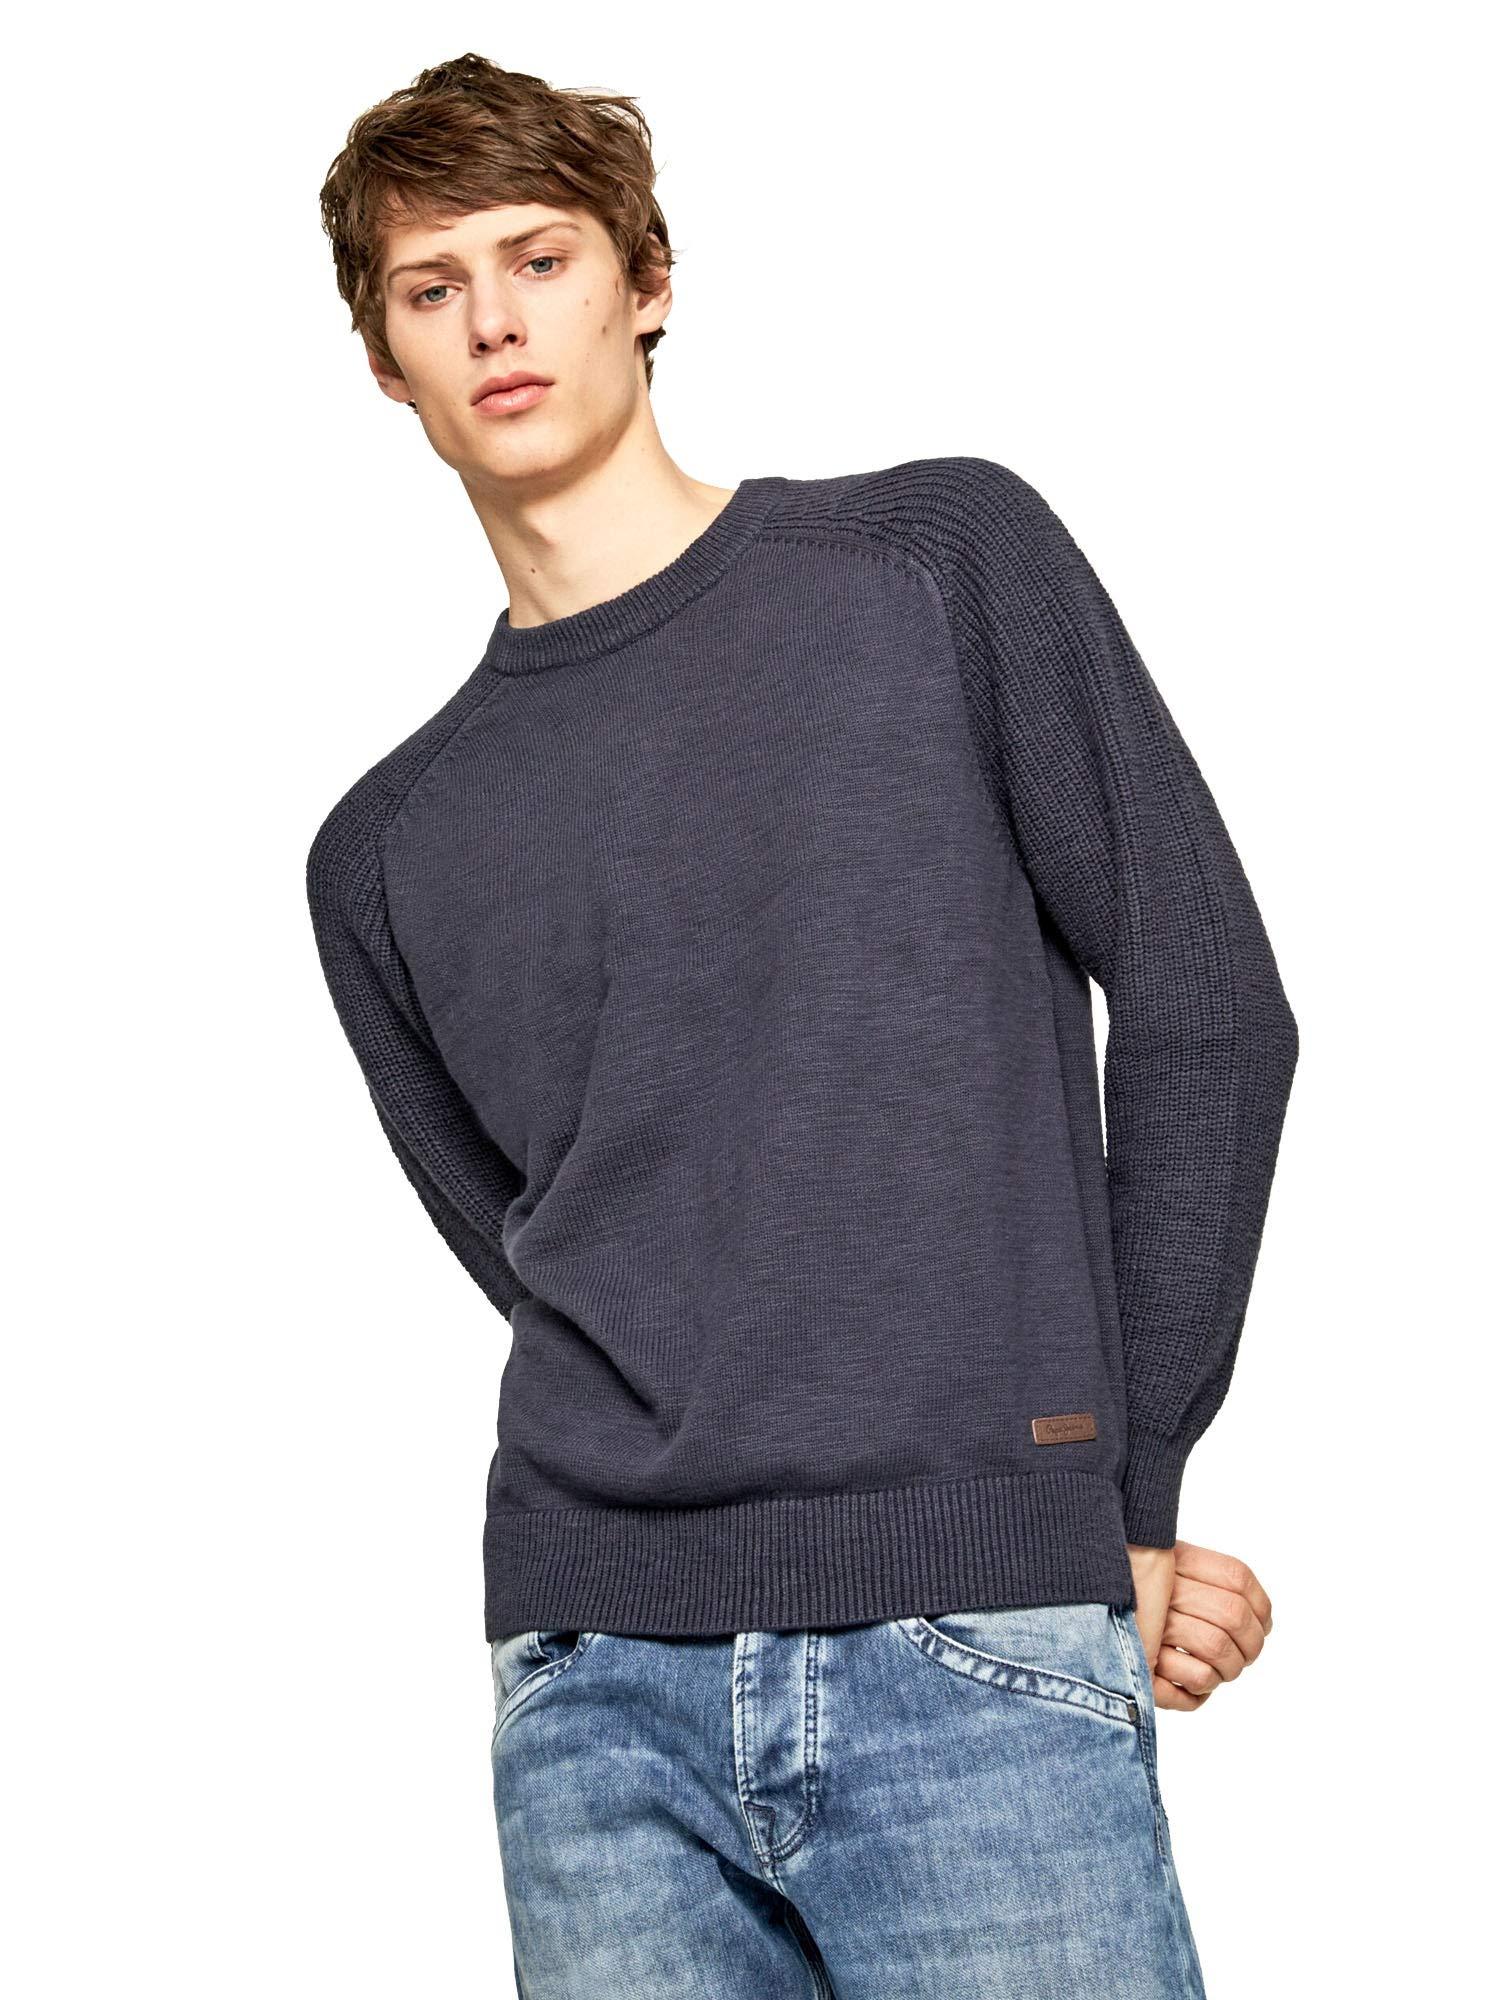 Pepe Jeans Andro Suéter para Hombre